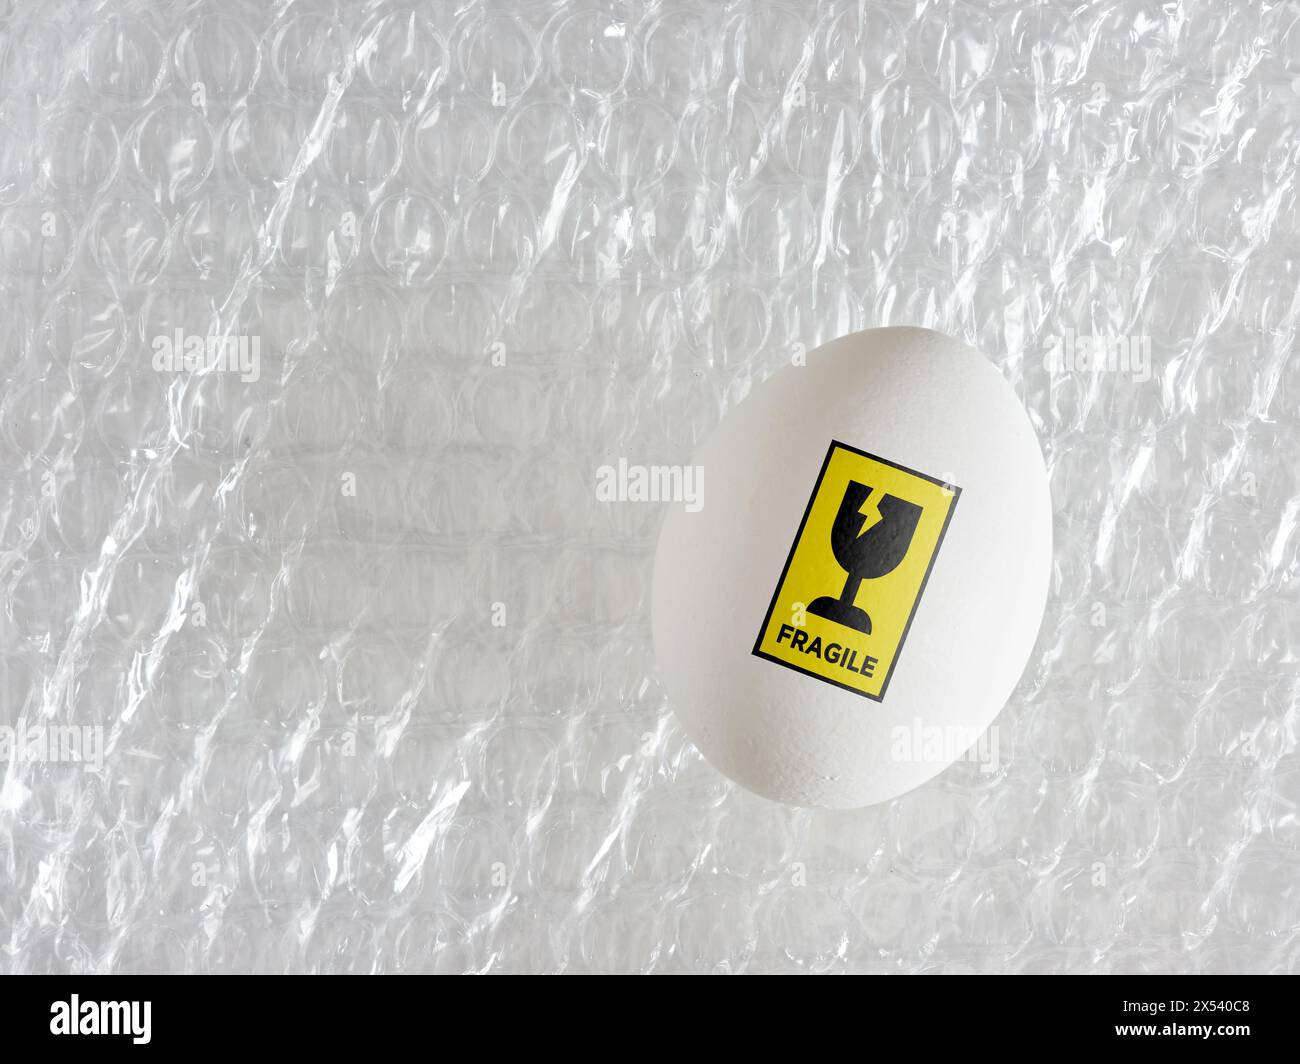 Packaging and delivery of fragile goods. Transportation and delivery with care. Egg with fragile sticker on a bubble wrap. Stock Photo